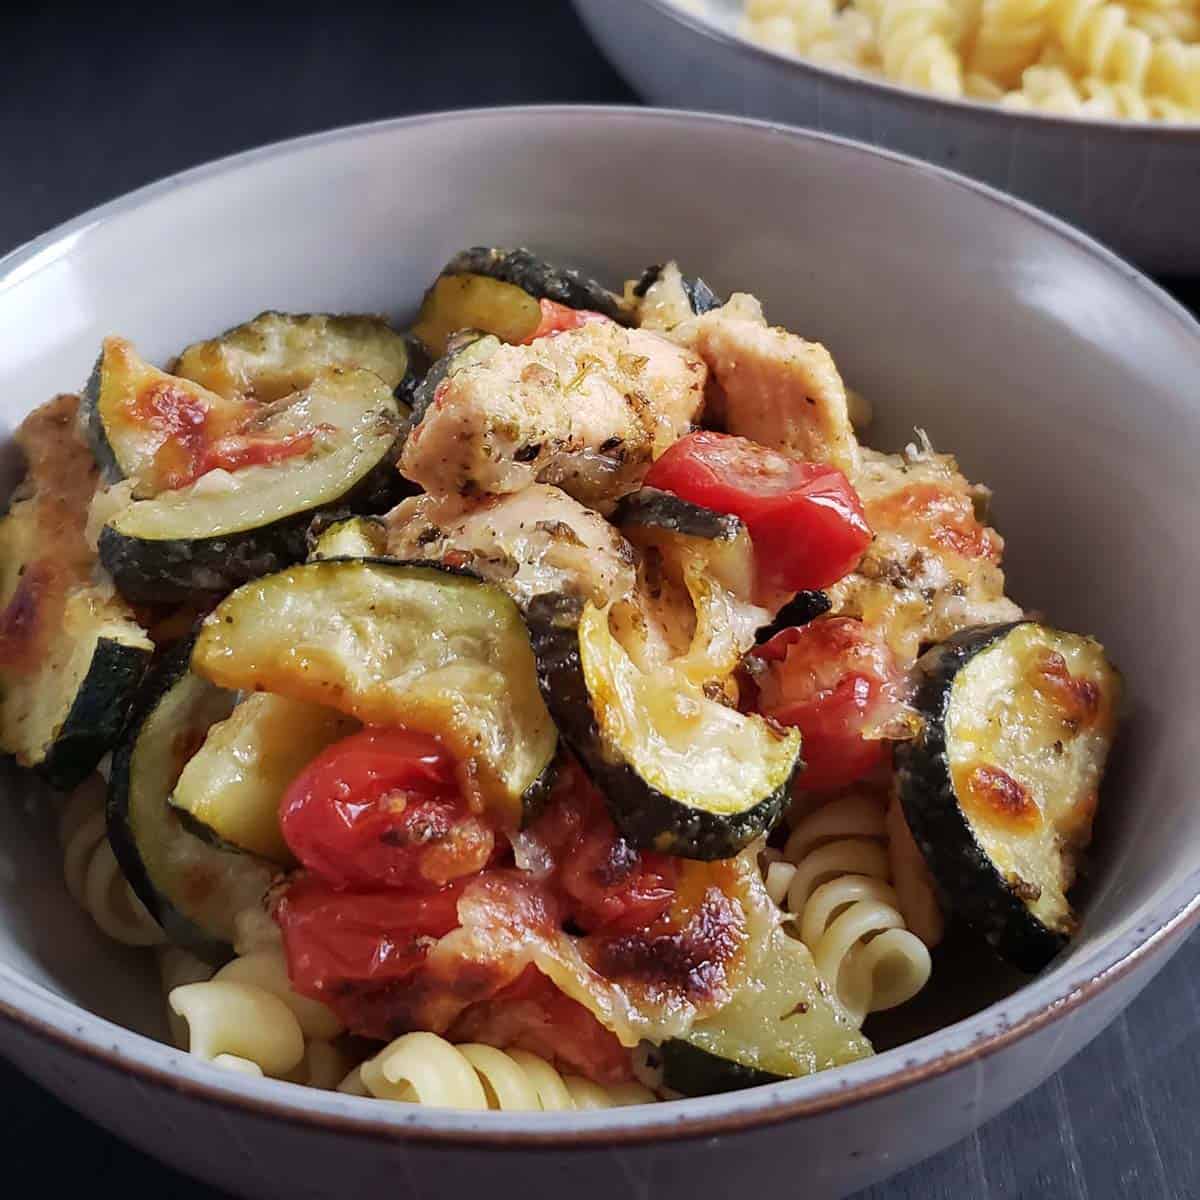 Zucchini, chicken, and tomatoes with pasta in a bowl.